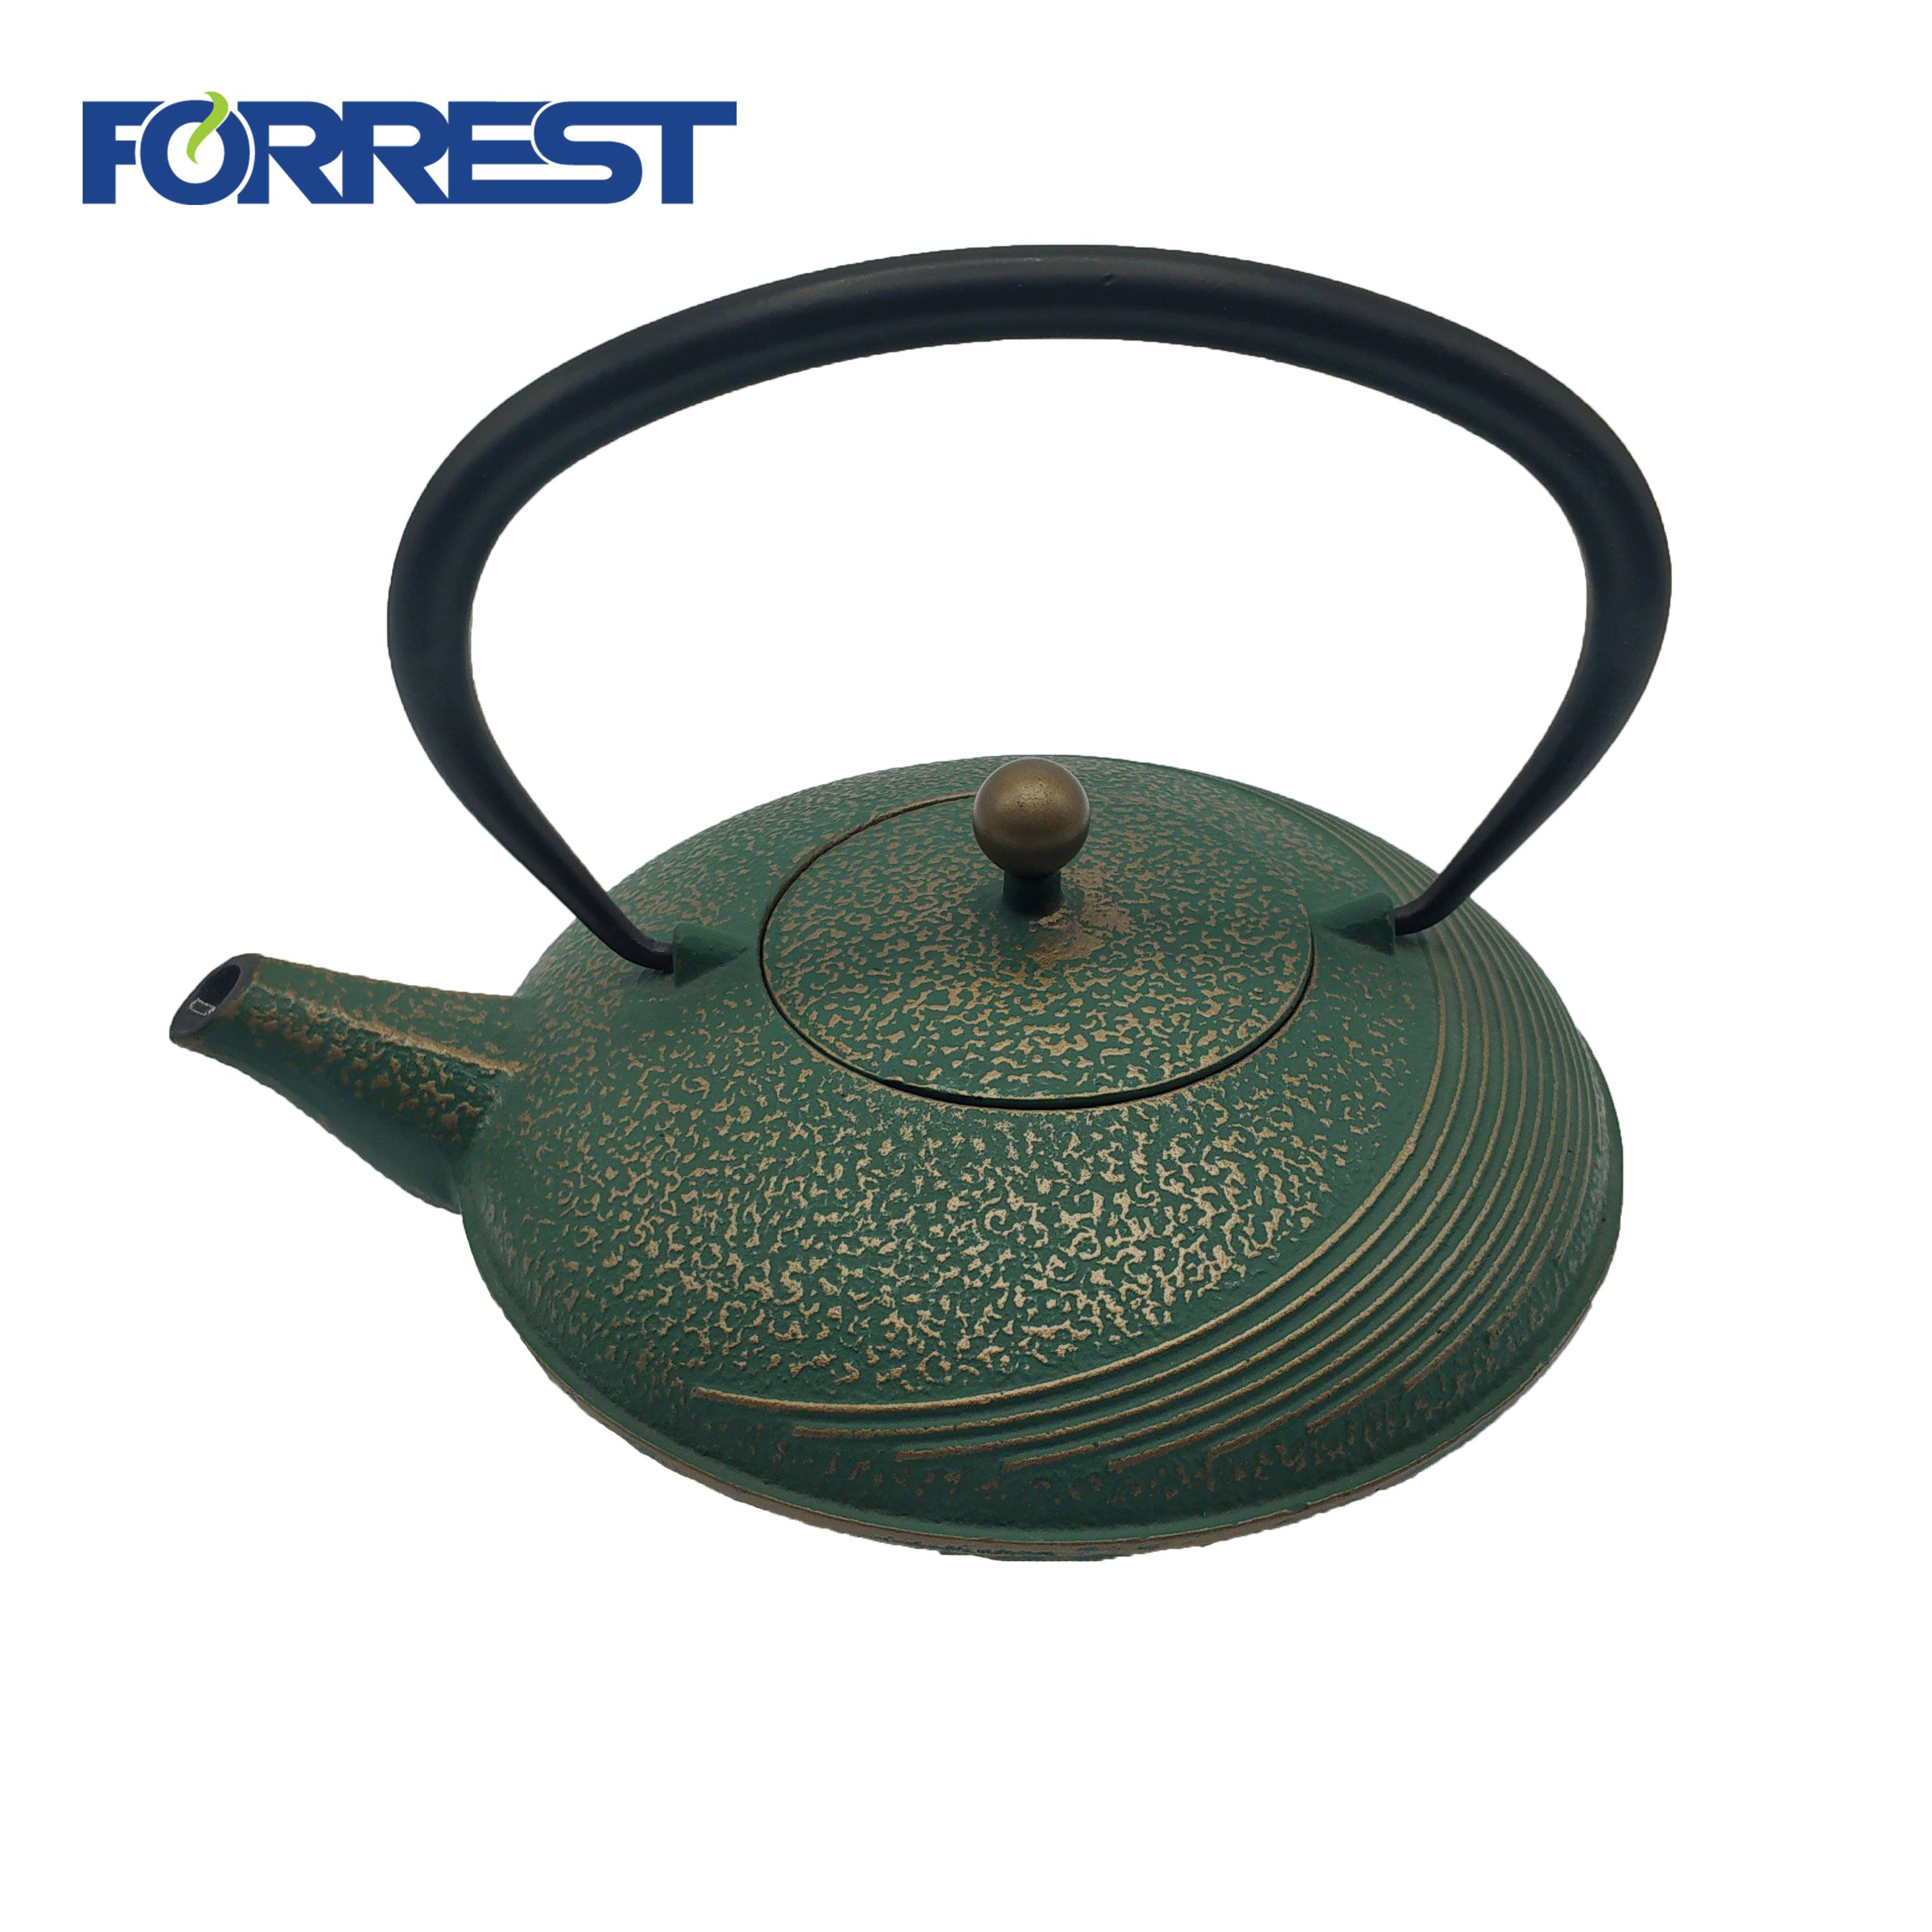 One of Hottest for Teapot - Round cast iron teapot with stainless infuse – Forrest